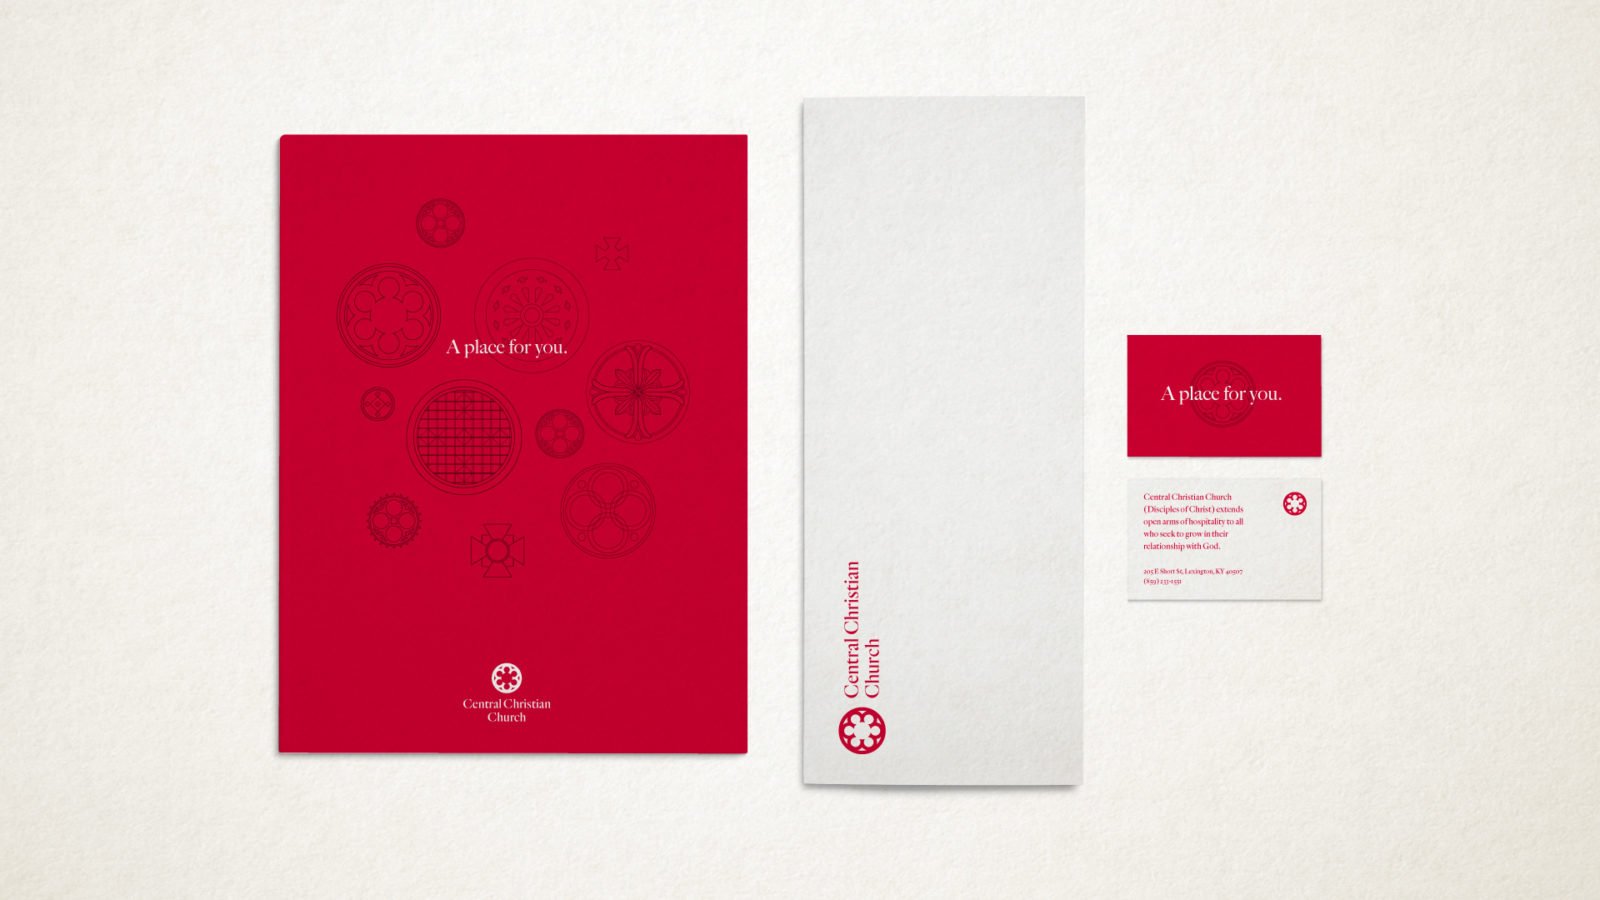 Slogan and illustrations for the Central Christian Church brand identity